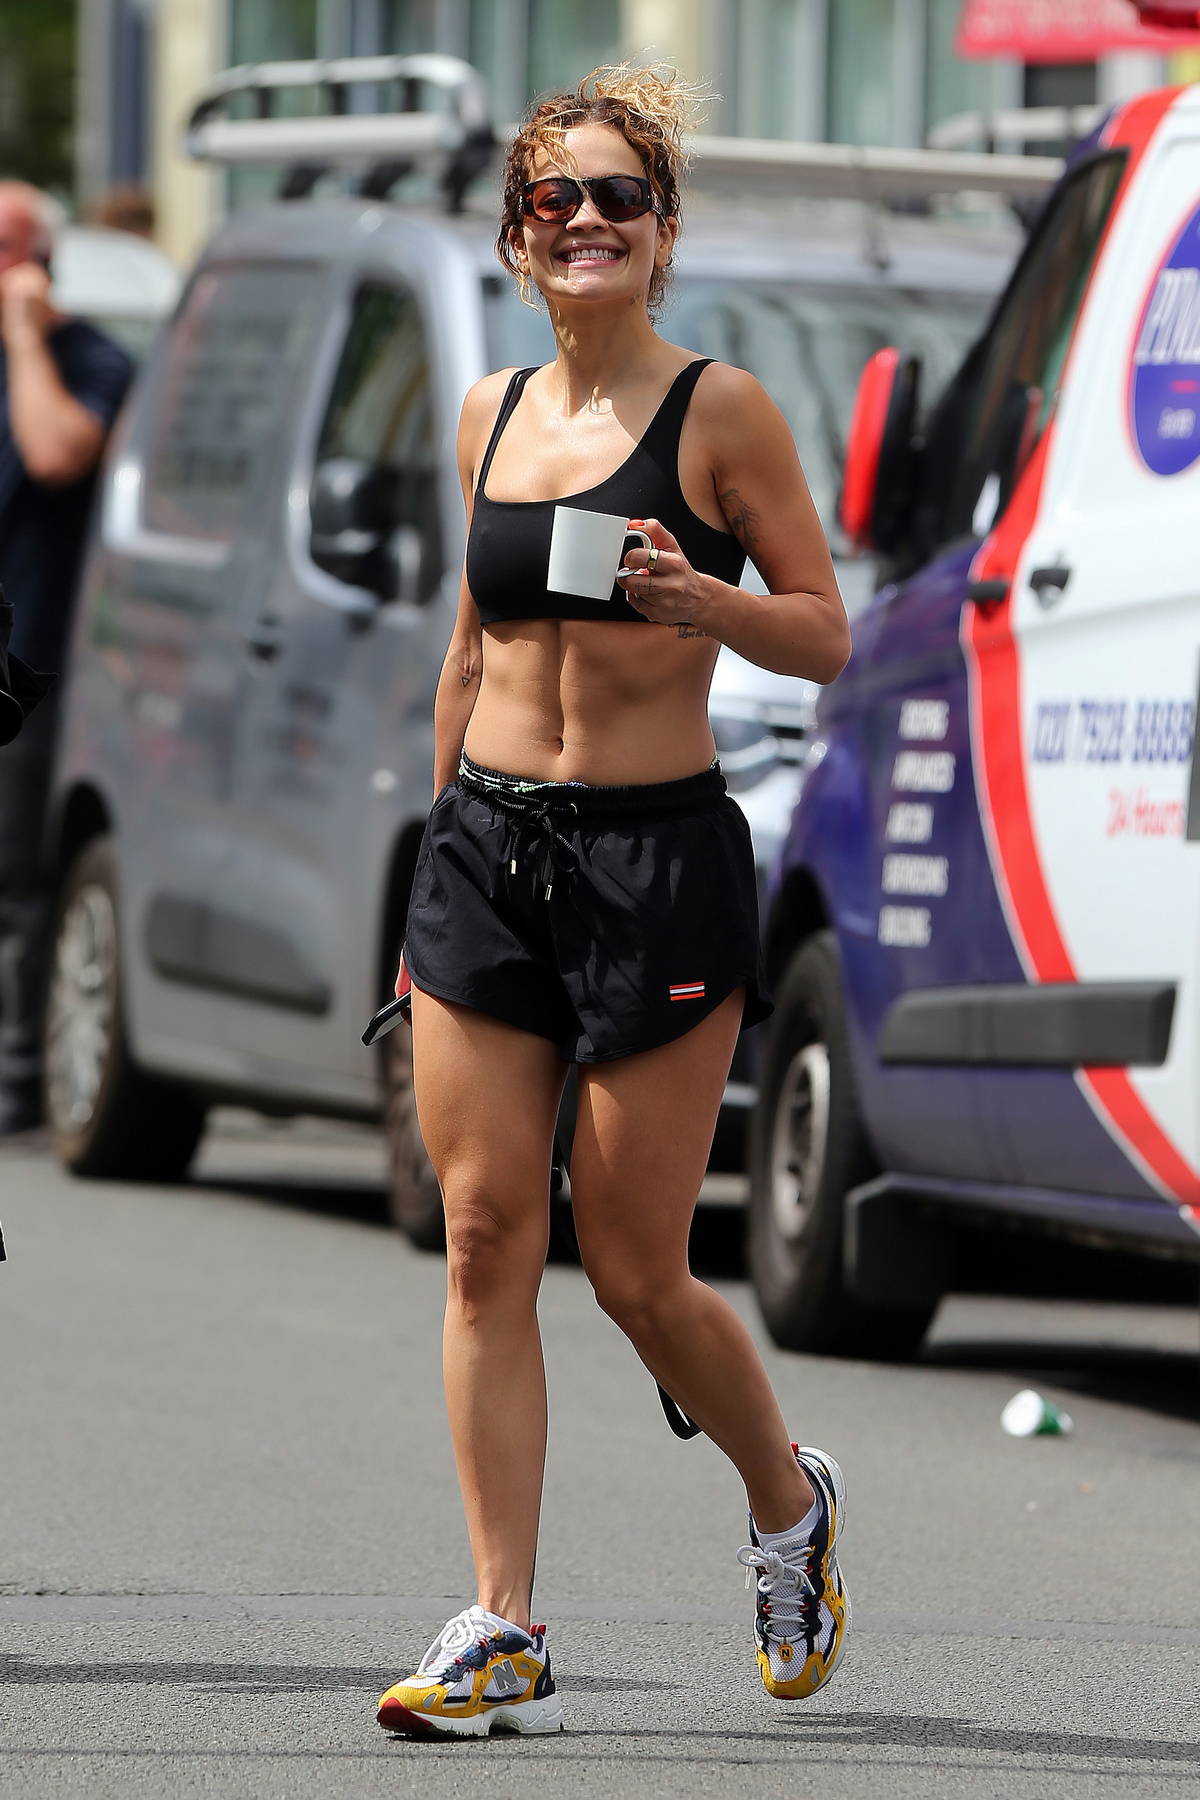 https://www.celebsfirst.com/wp-content/uploads/2023/07/Rita-Ora-showcases-her-amazing-abs-in-a-black-sports-bra-and-shorts-while-leaving-after-a-workout-session-in-London-UK-130723_9.jpg